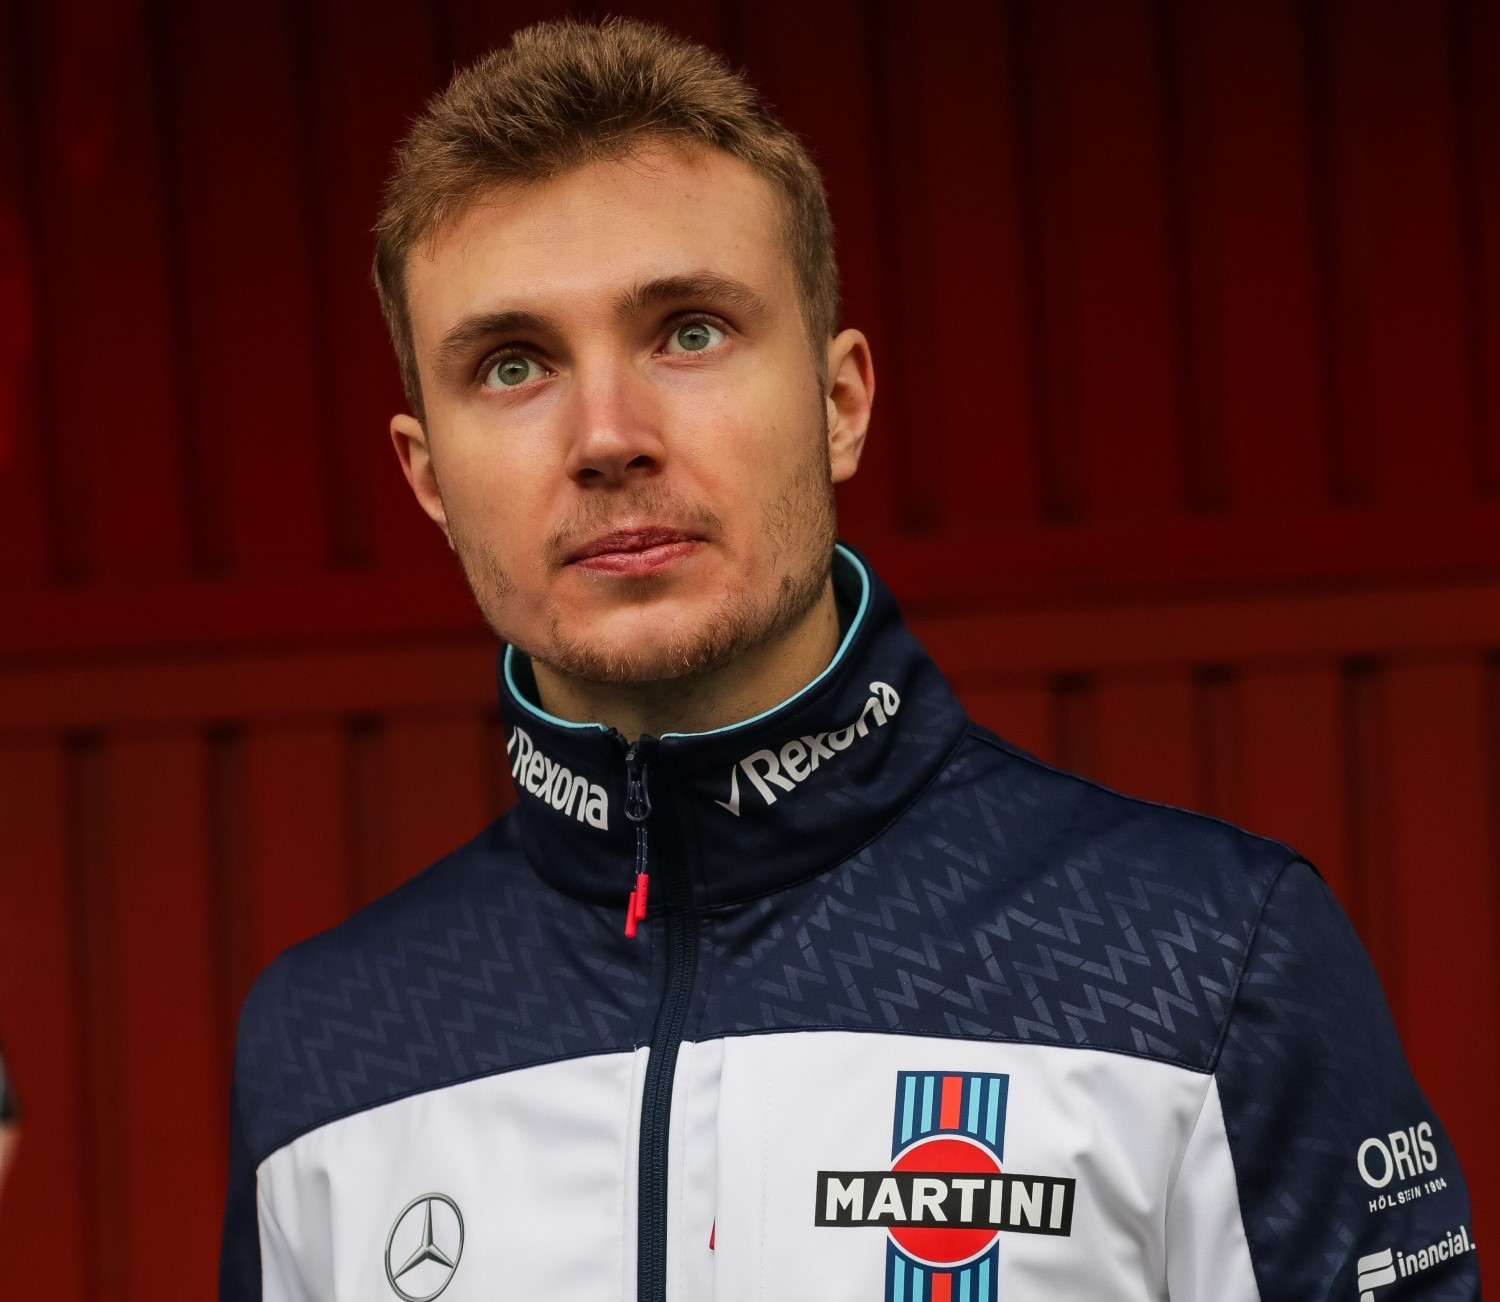 Sergey Sirotkin must know his check is big enough to keep his ride in the cash strapped team